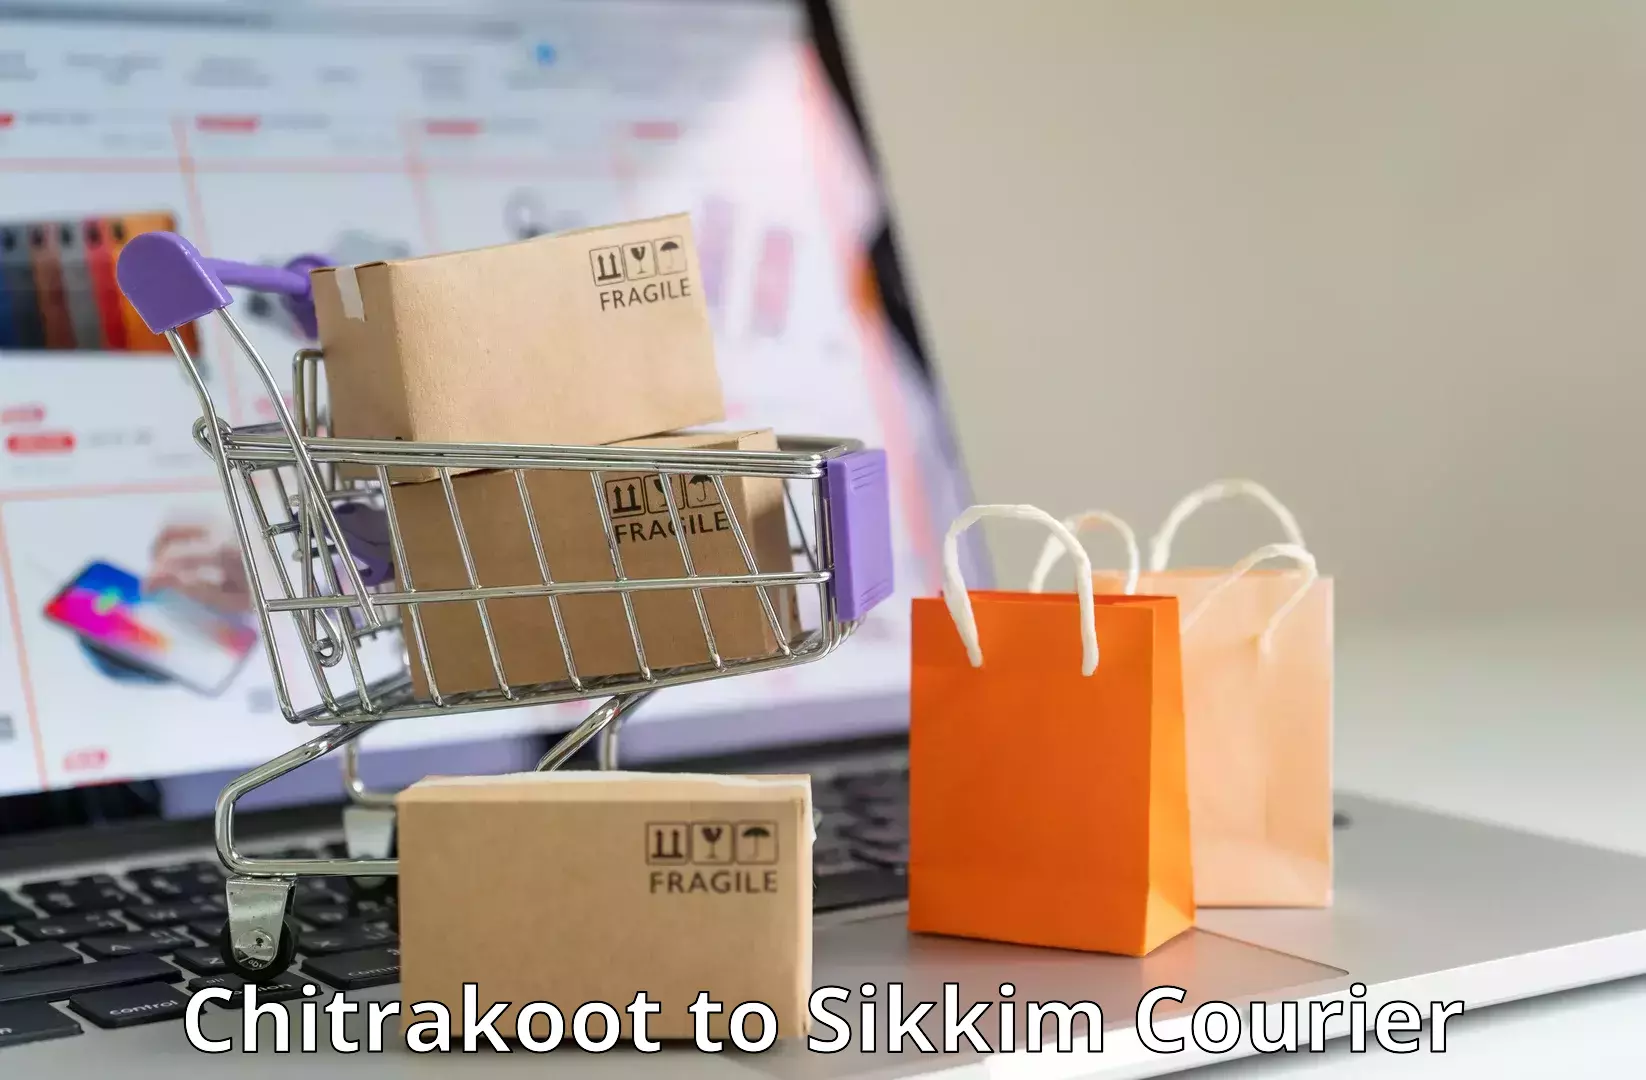 Full-service courier options in Chitrakoot to Pelling